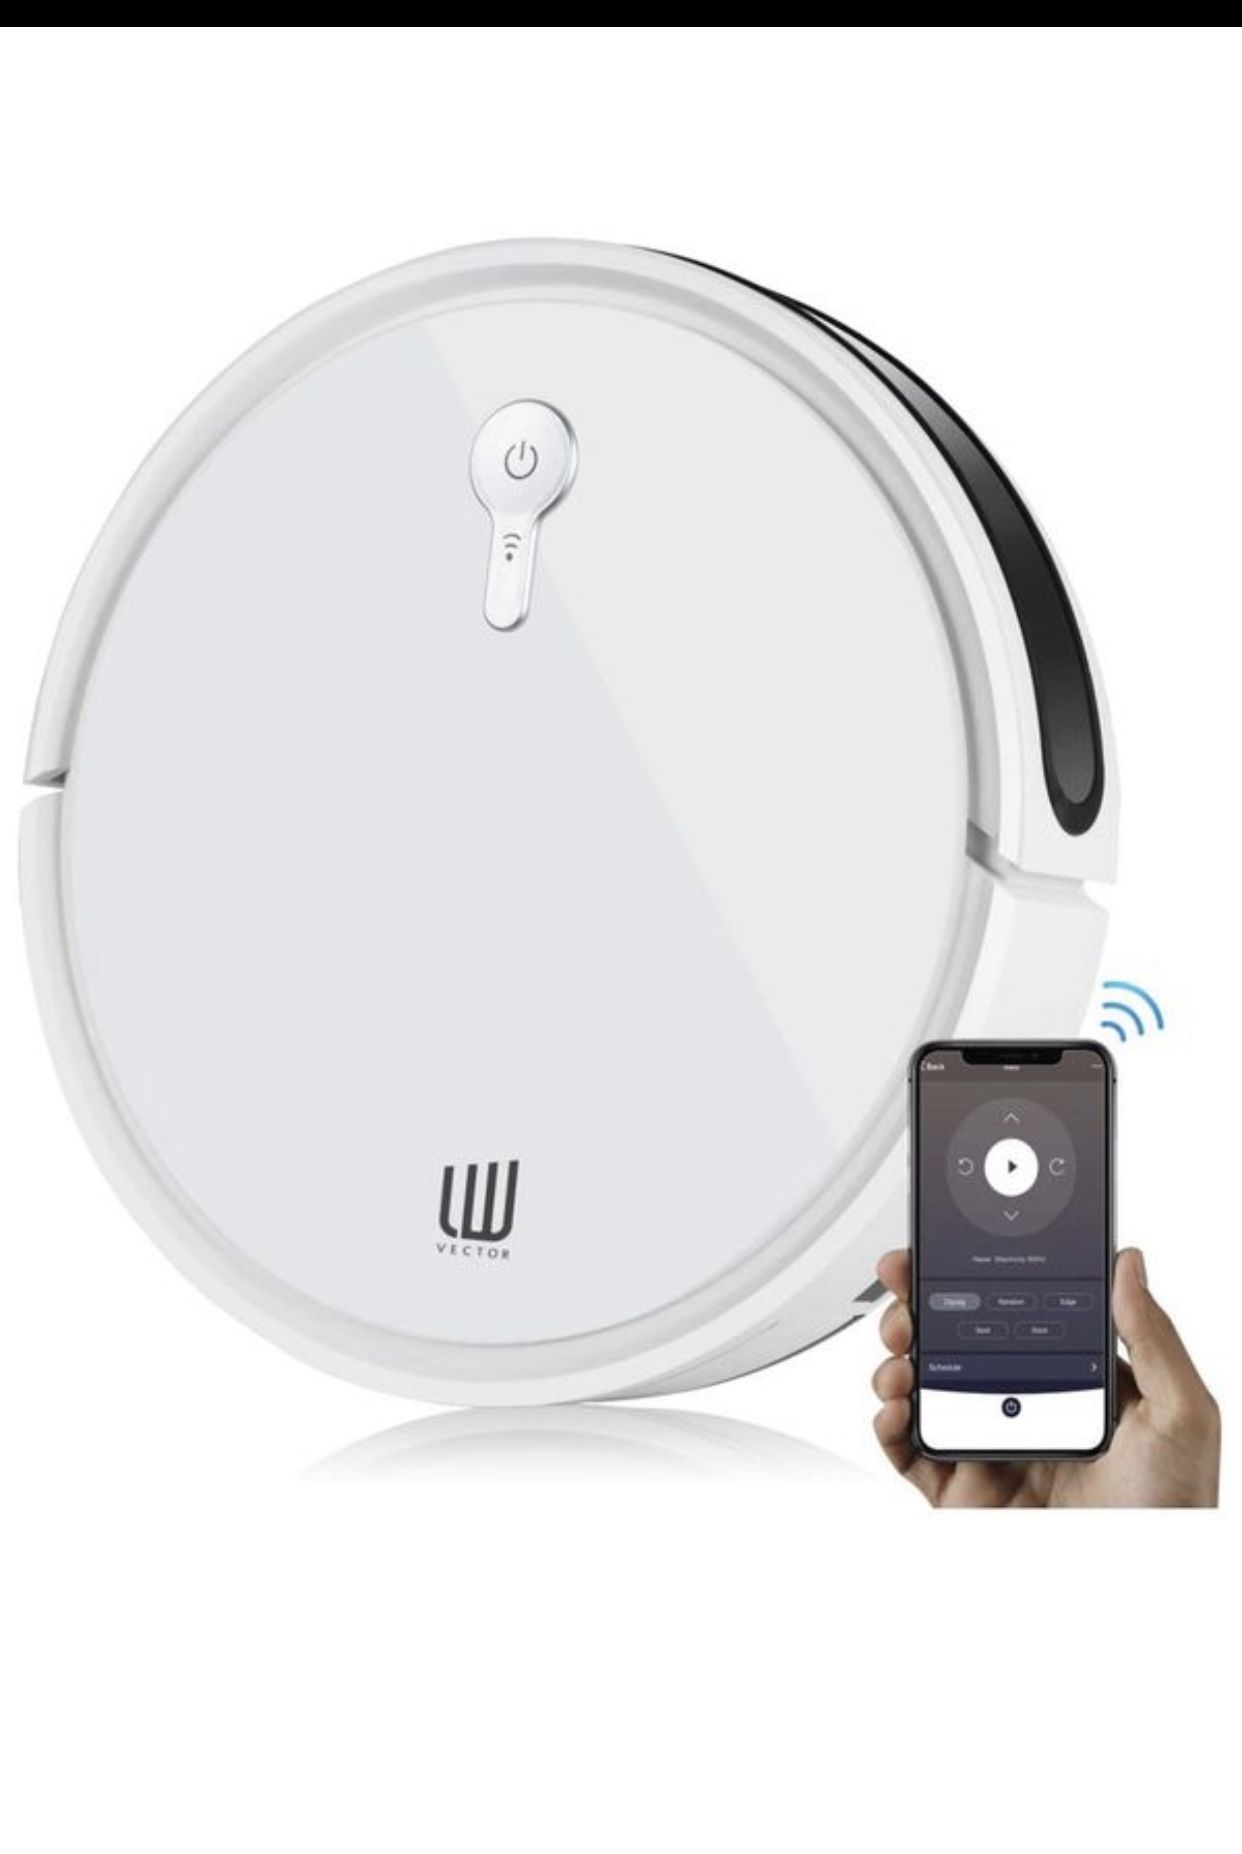 Robot Vacuum Cleaner,1400Pa Super Power Suction,Wi-Fi Connectivity,Super-Thin Quiet,Up to 120mins Runtime/Automatic Self-Charging Robotic Vacuum for